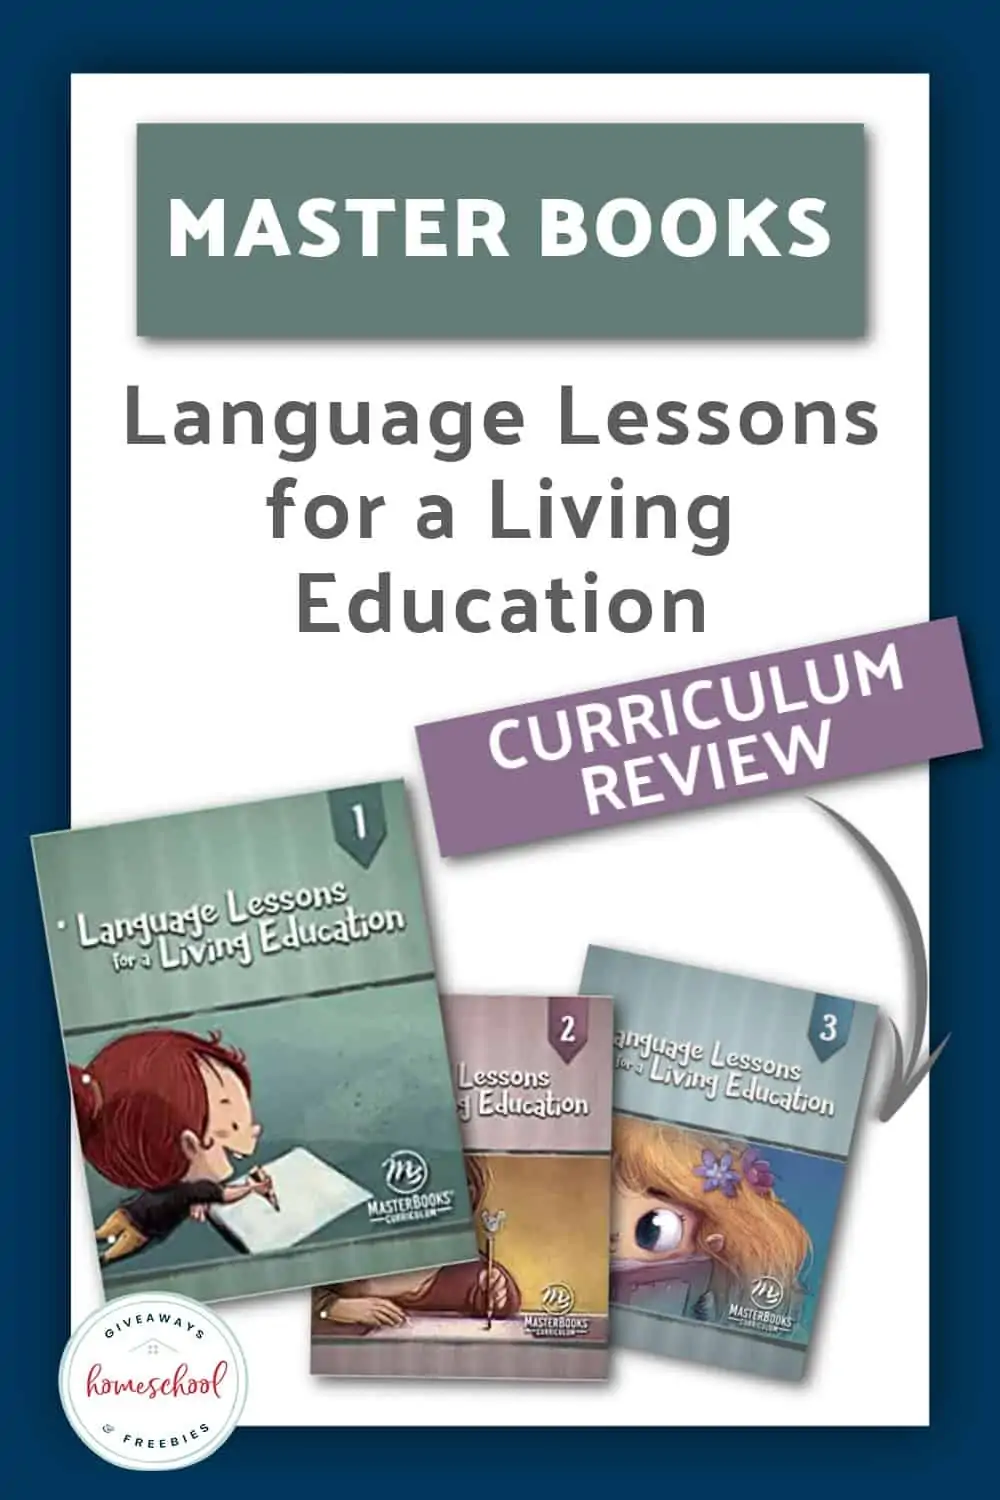 Master Books Language Lessons for a Living Education Curriculum Review with Book Covers